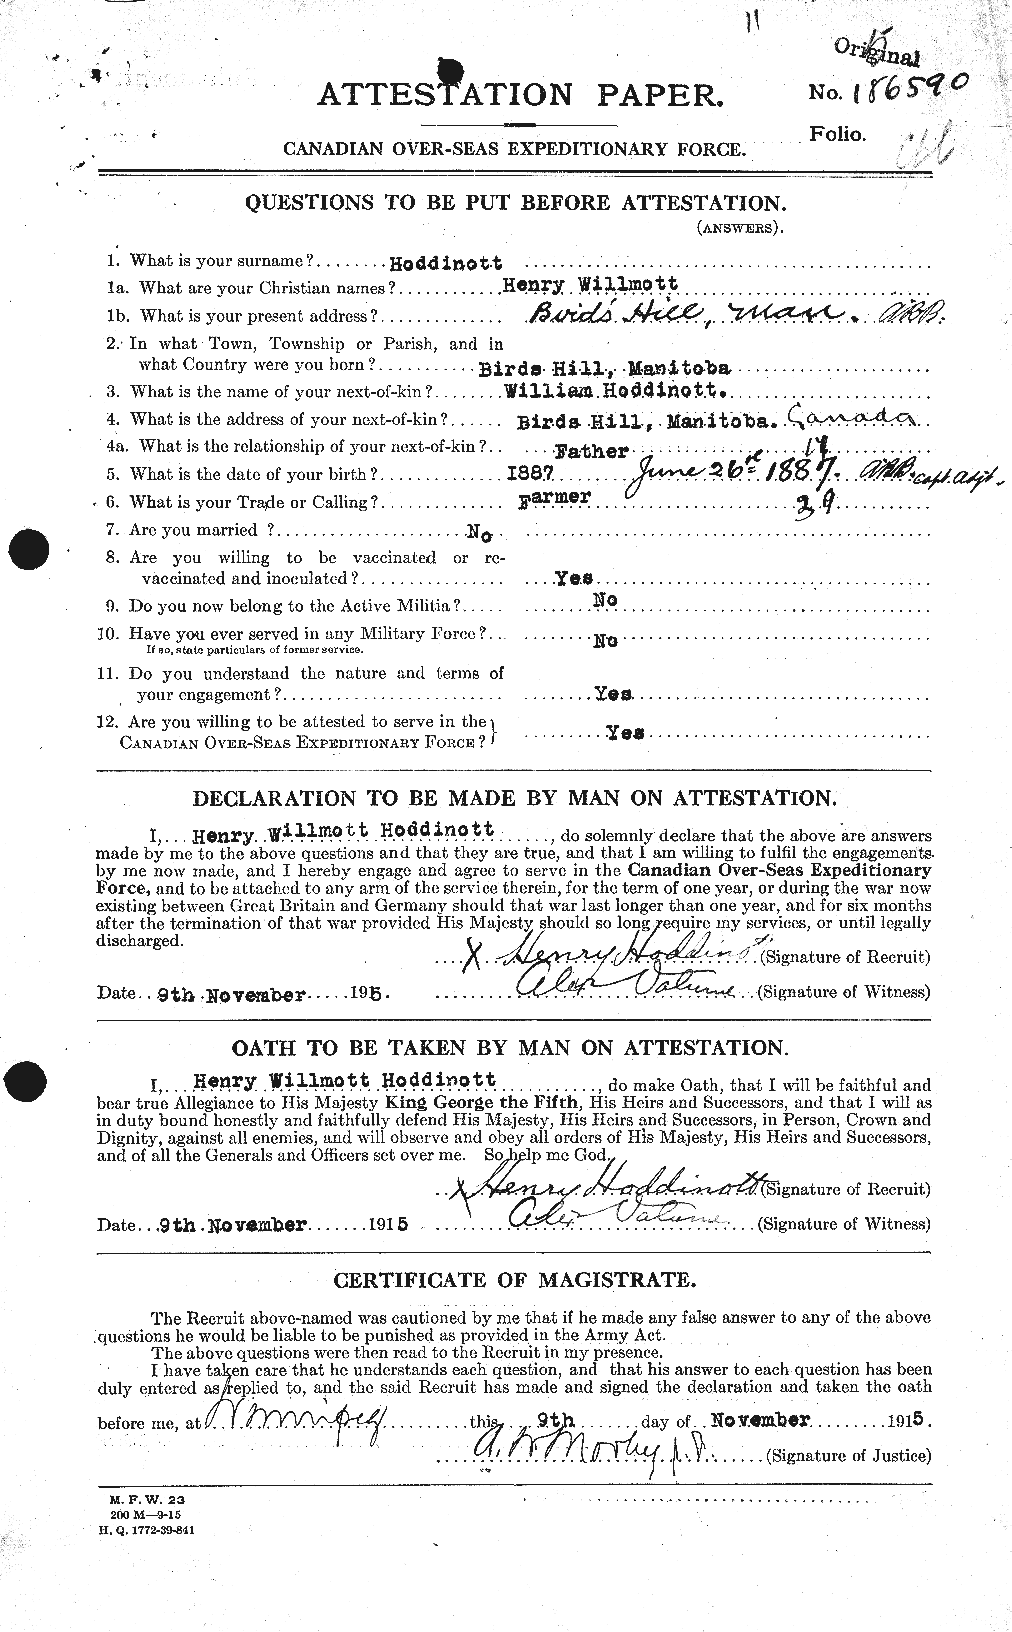 Personnel Records of the First World War - CEF 397812a